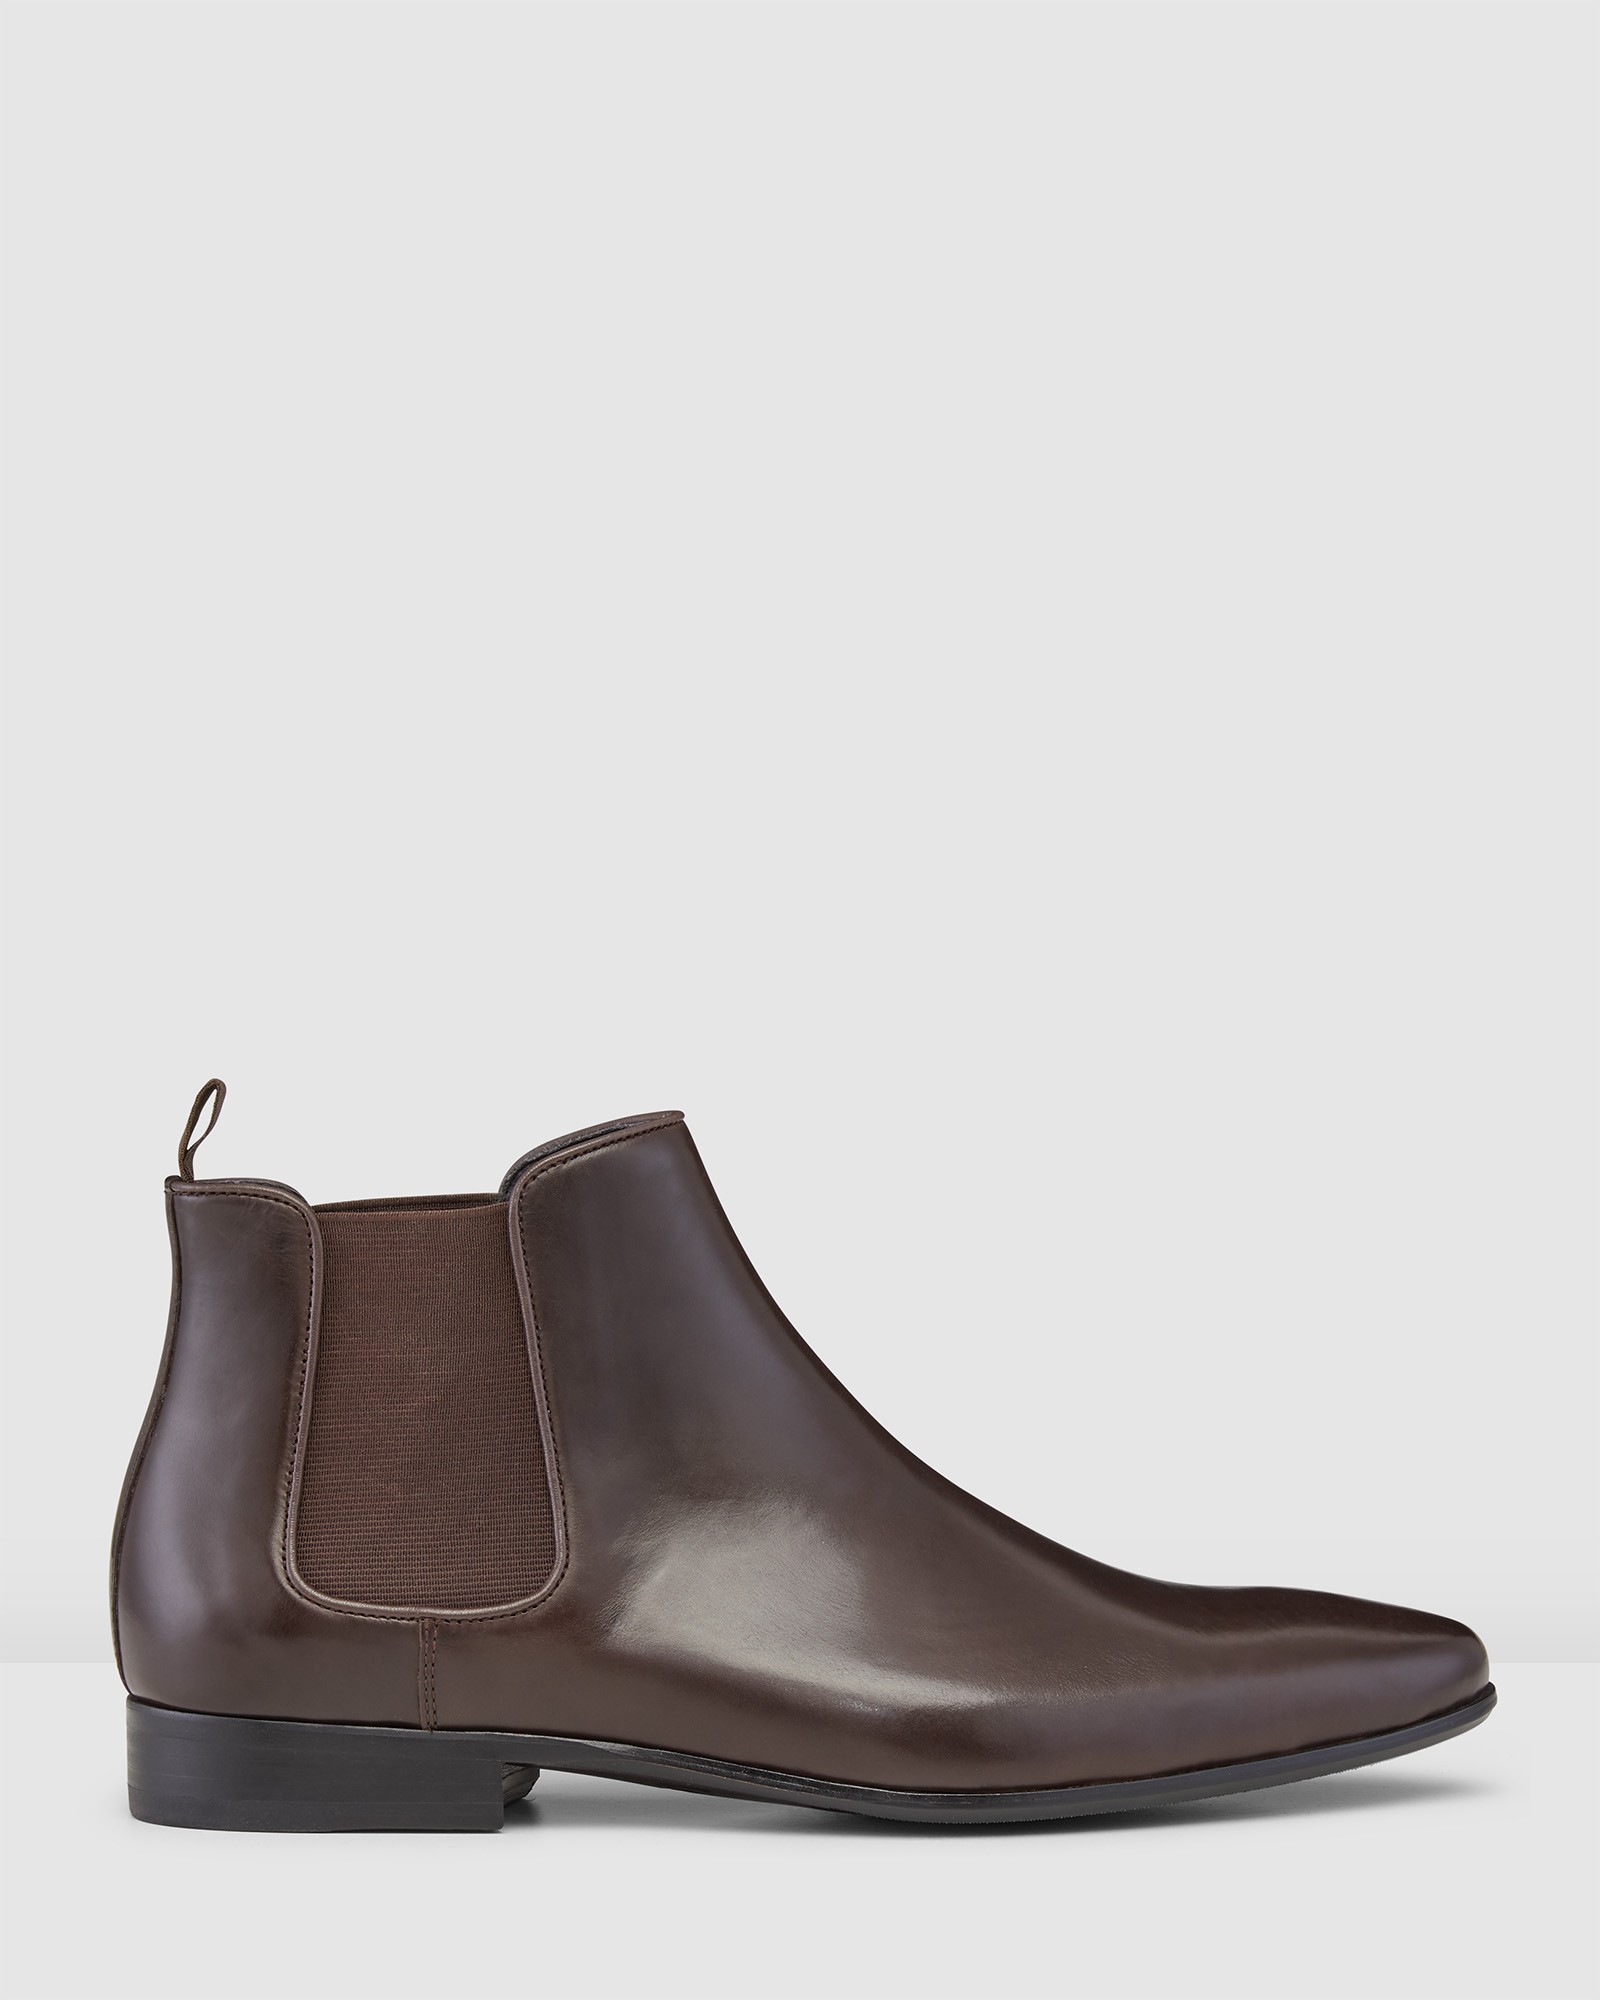 Brodrick Chelsea Boots Brown by Aquila | ShoeSales